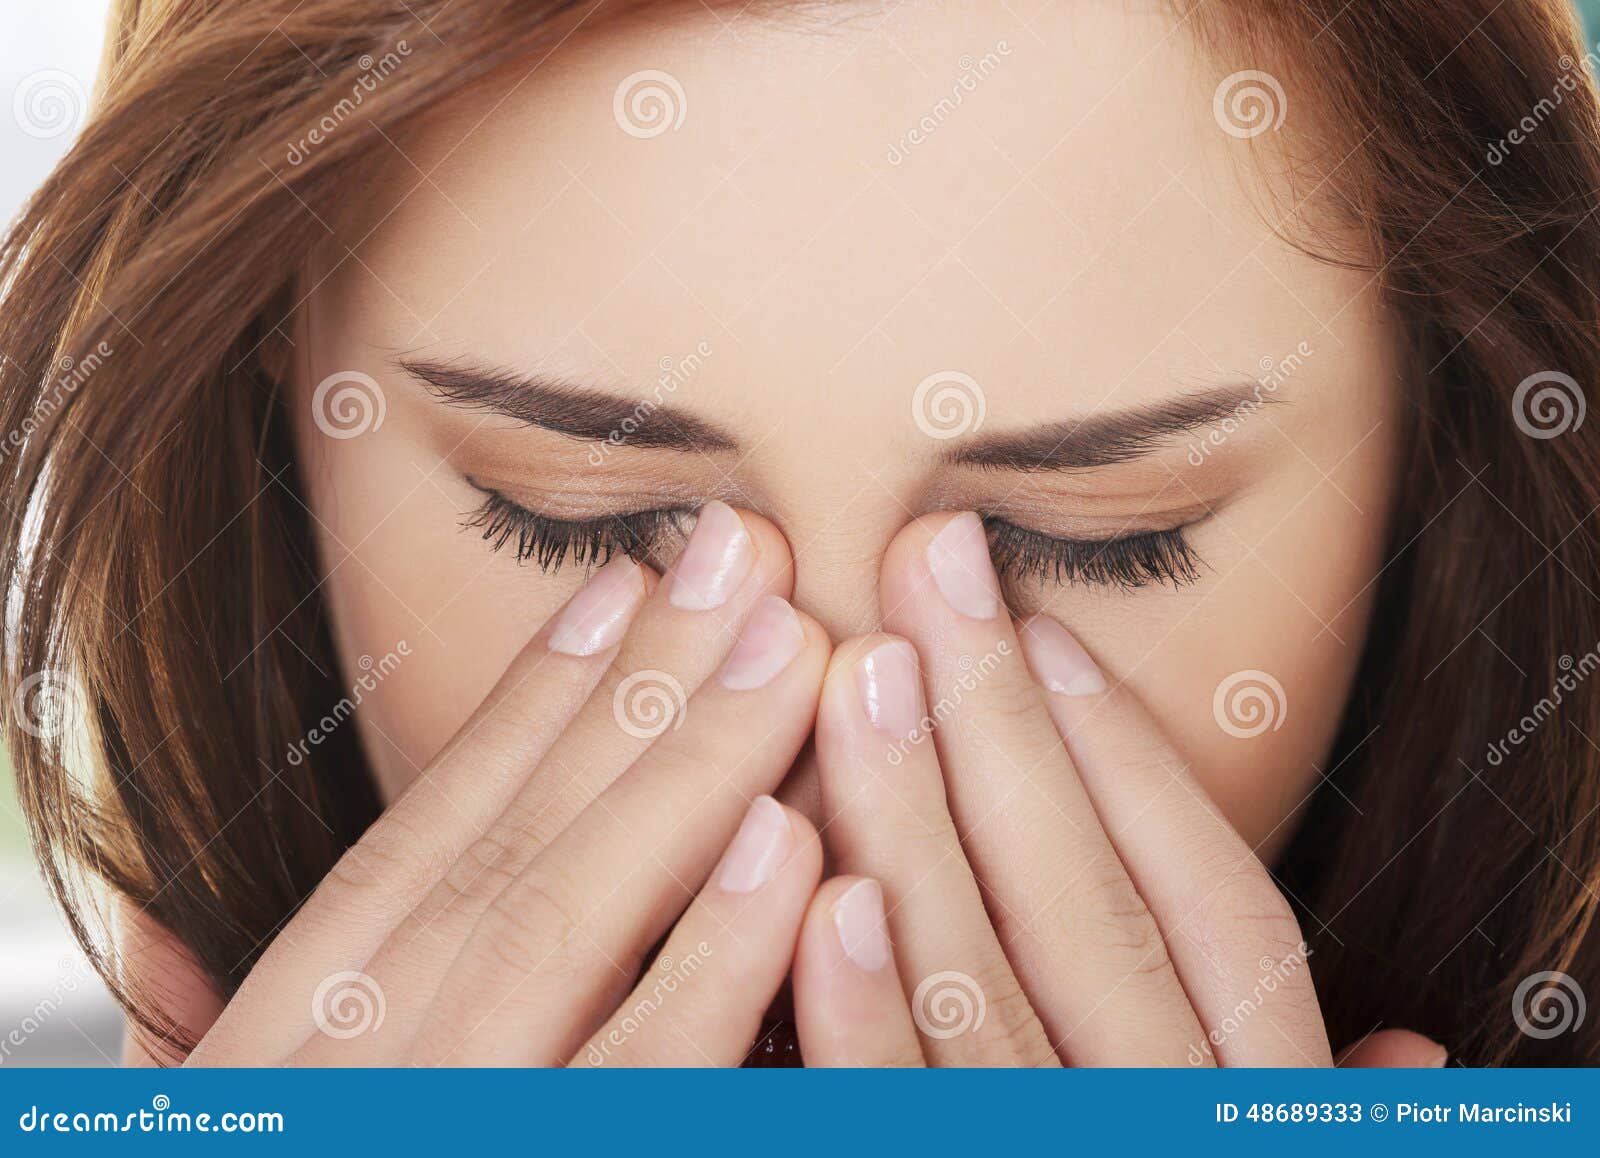 woman with sinus pressure pain